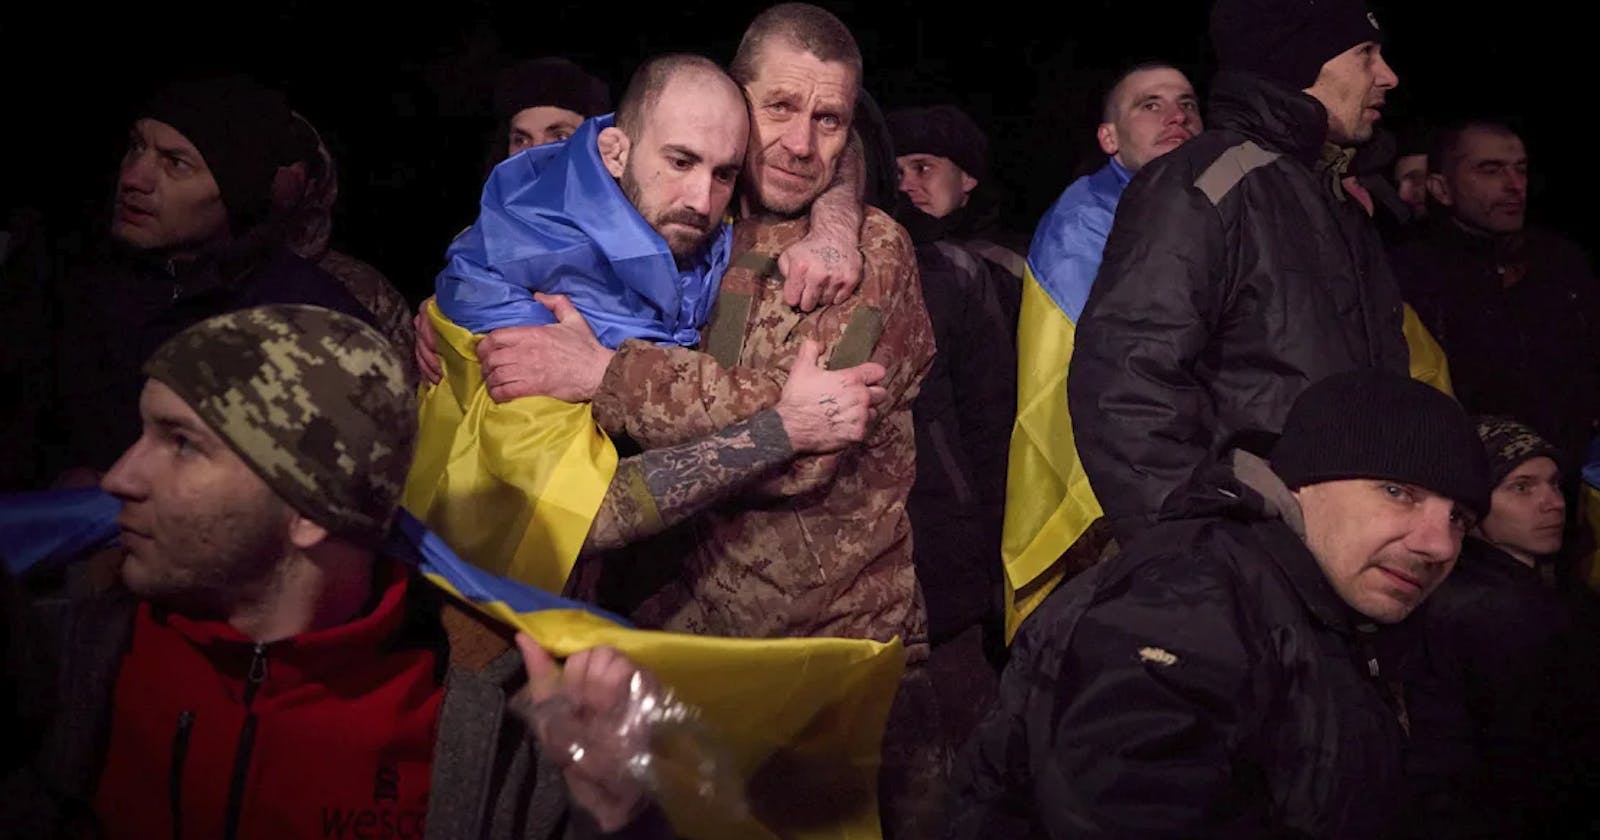 Ukraine and Russia carry out largest prisoner exchange since beginning of the war